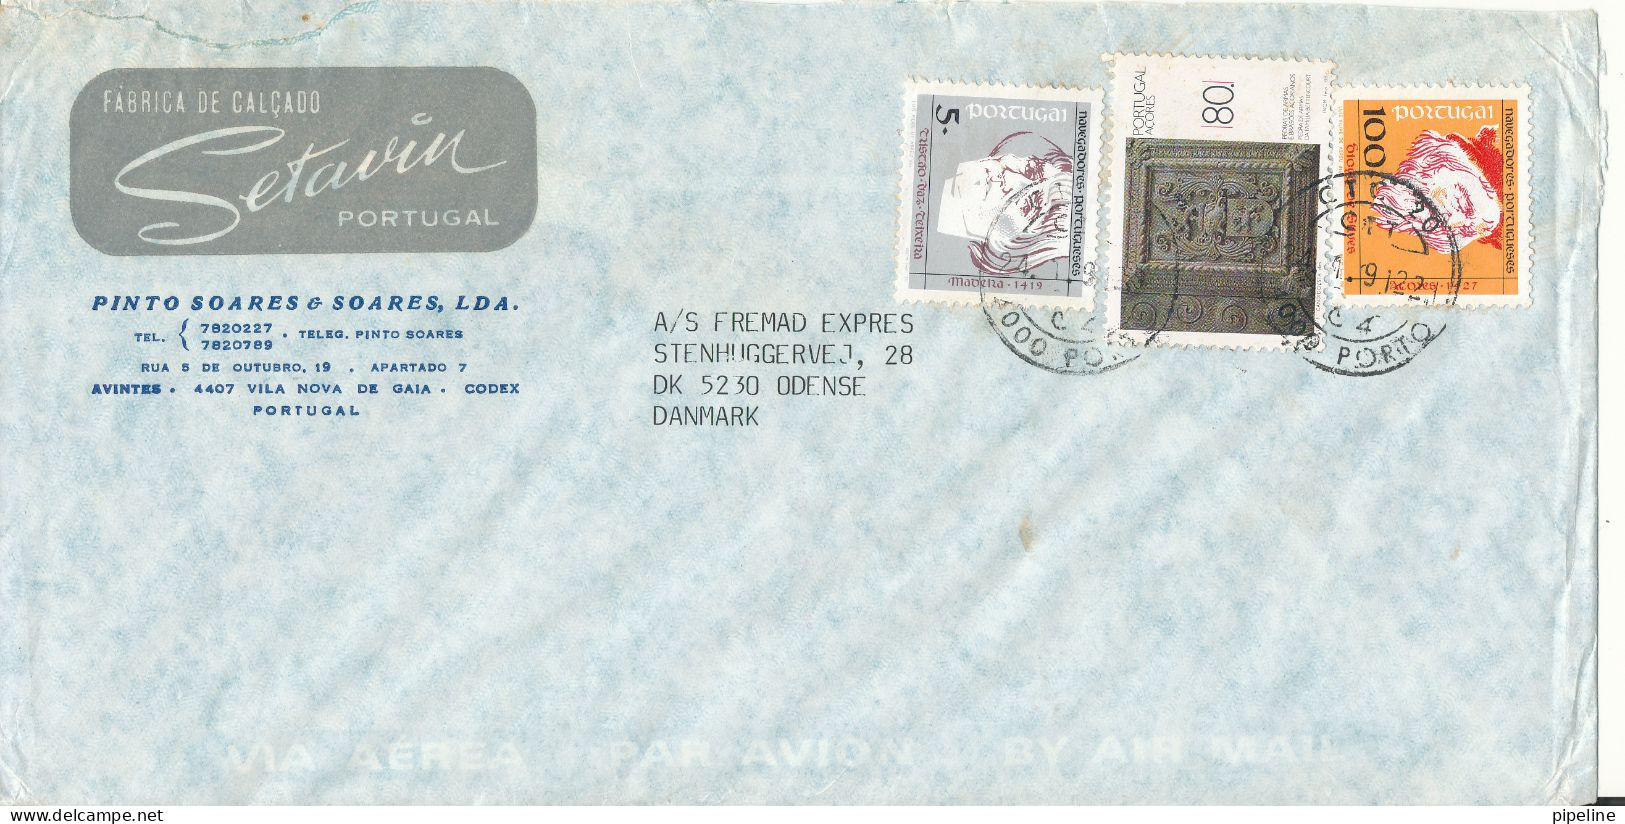 Portugal Air Mail Cover Sent To Denmark 24-1-1991 Also With Azores Stamp - Covers & Documents